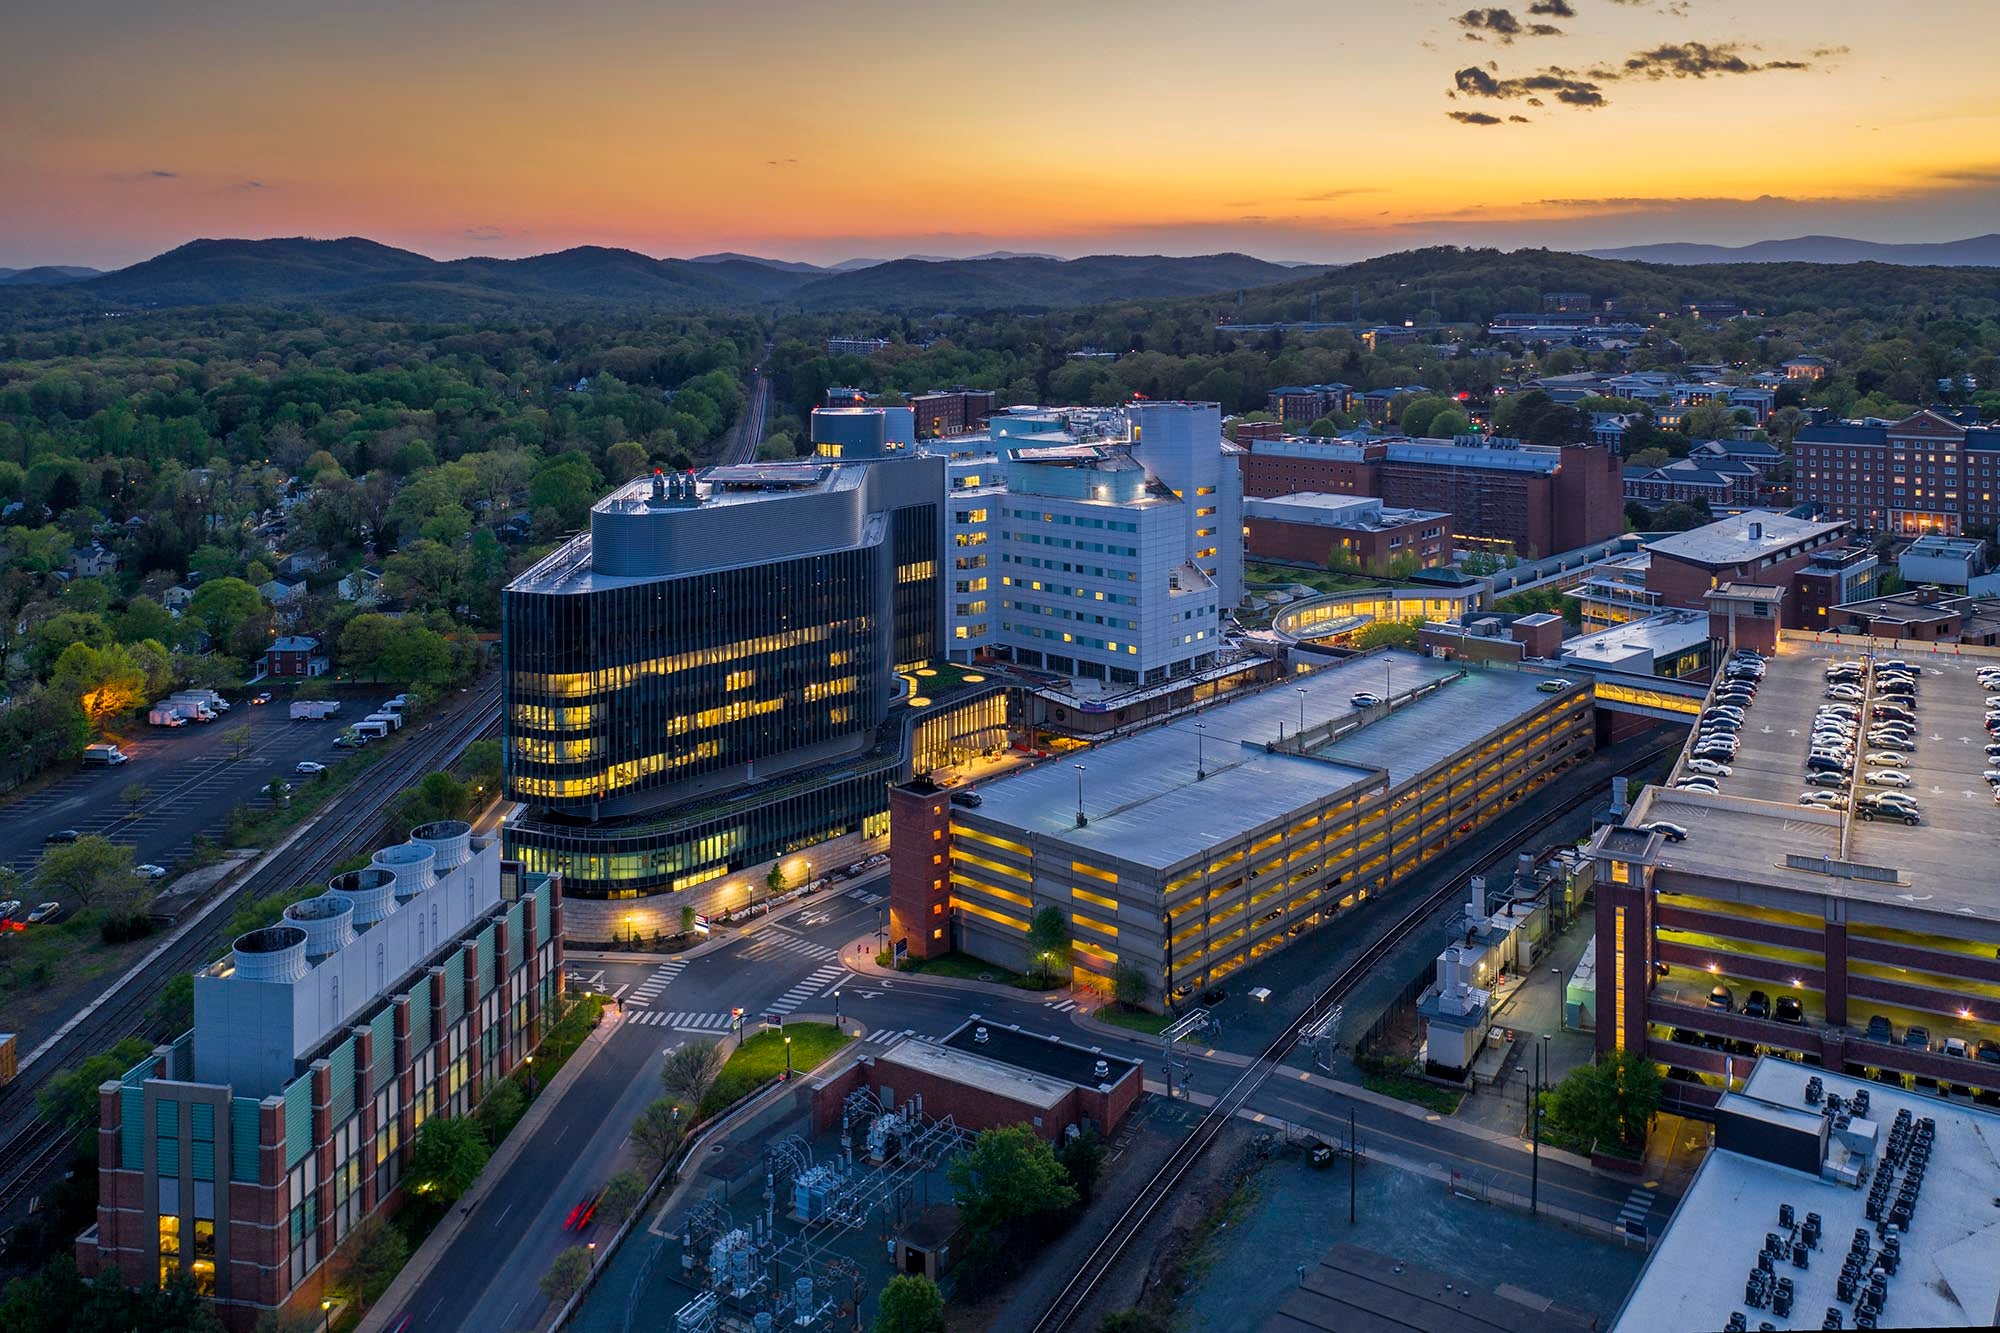 University of Virginia aerial View of the Medical Center Hospital at Sunset